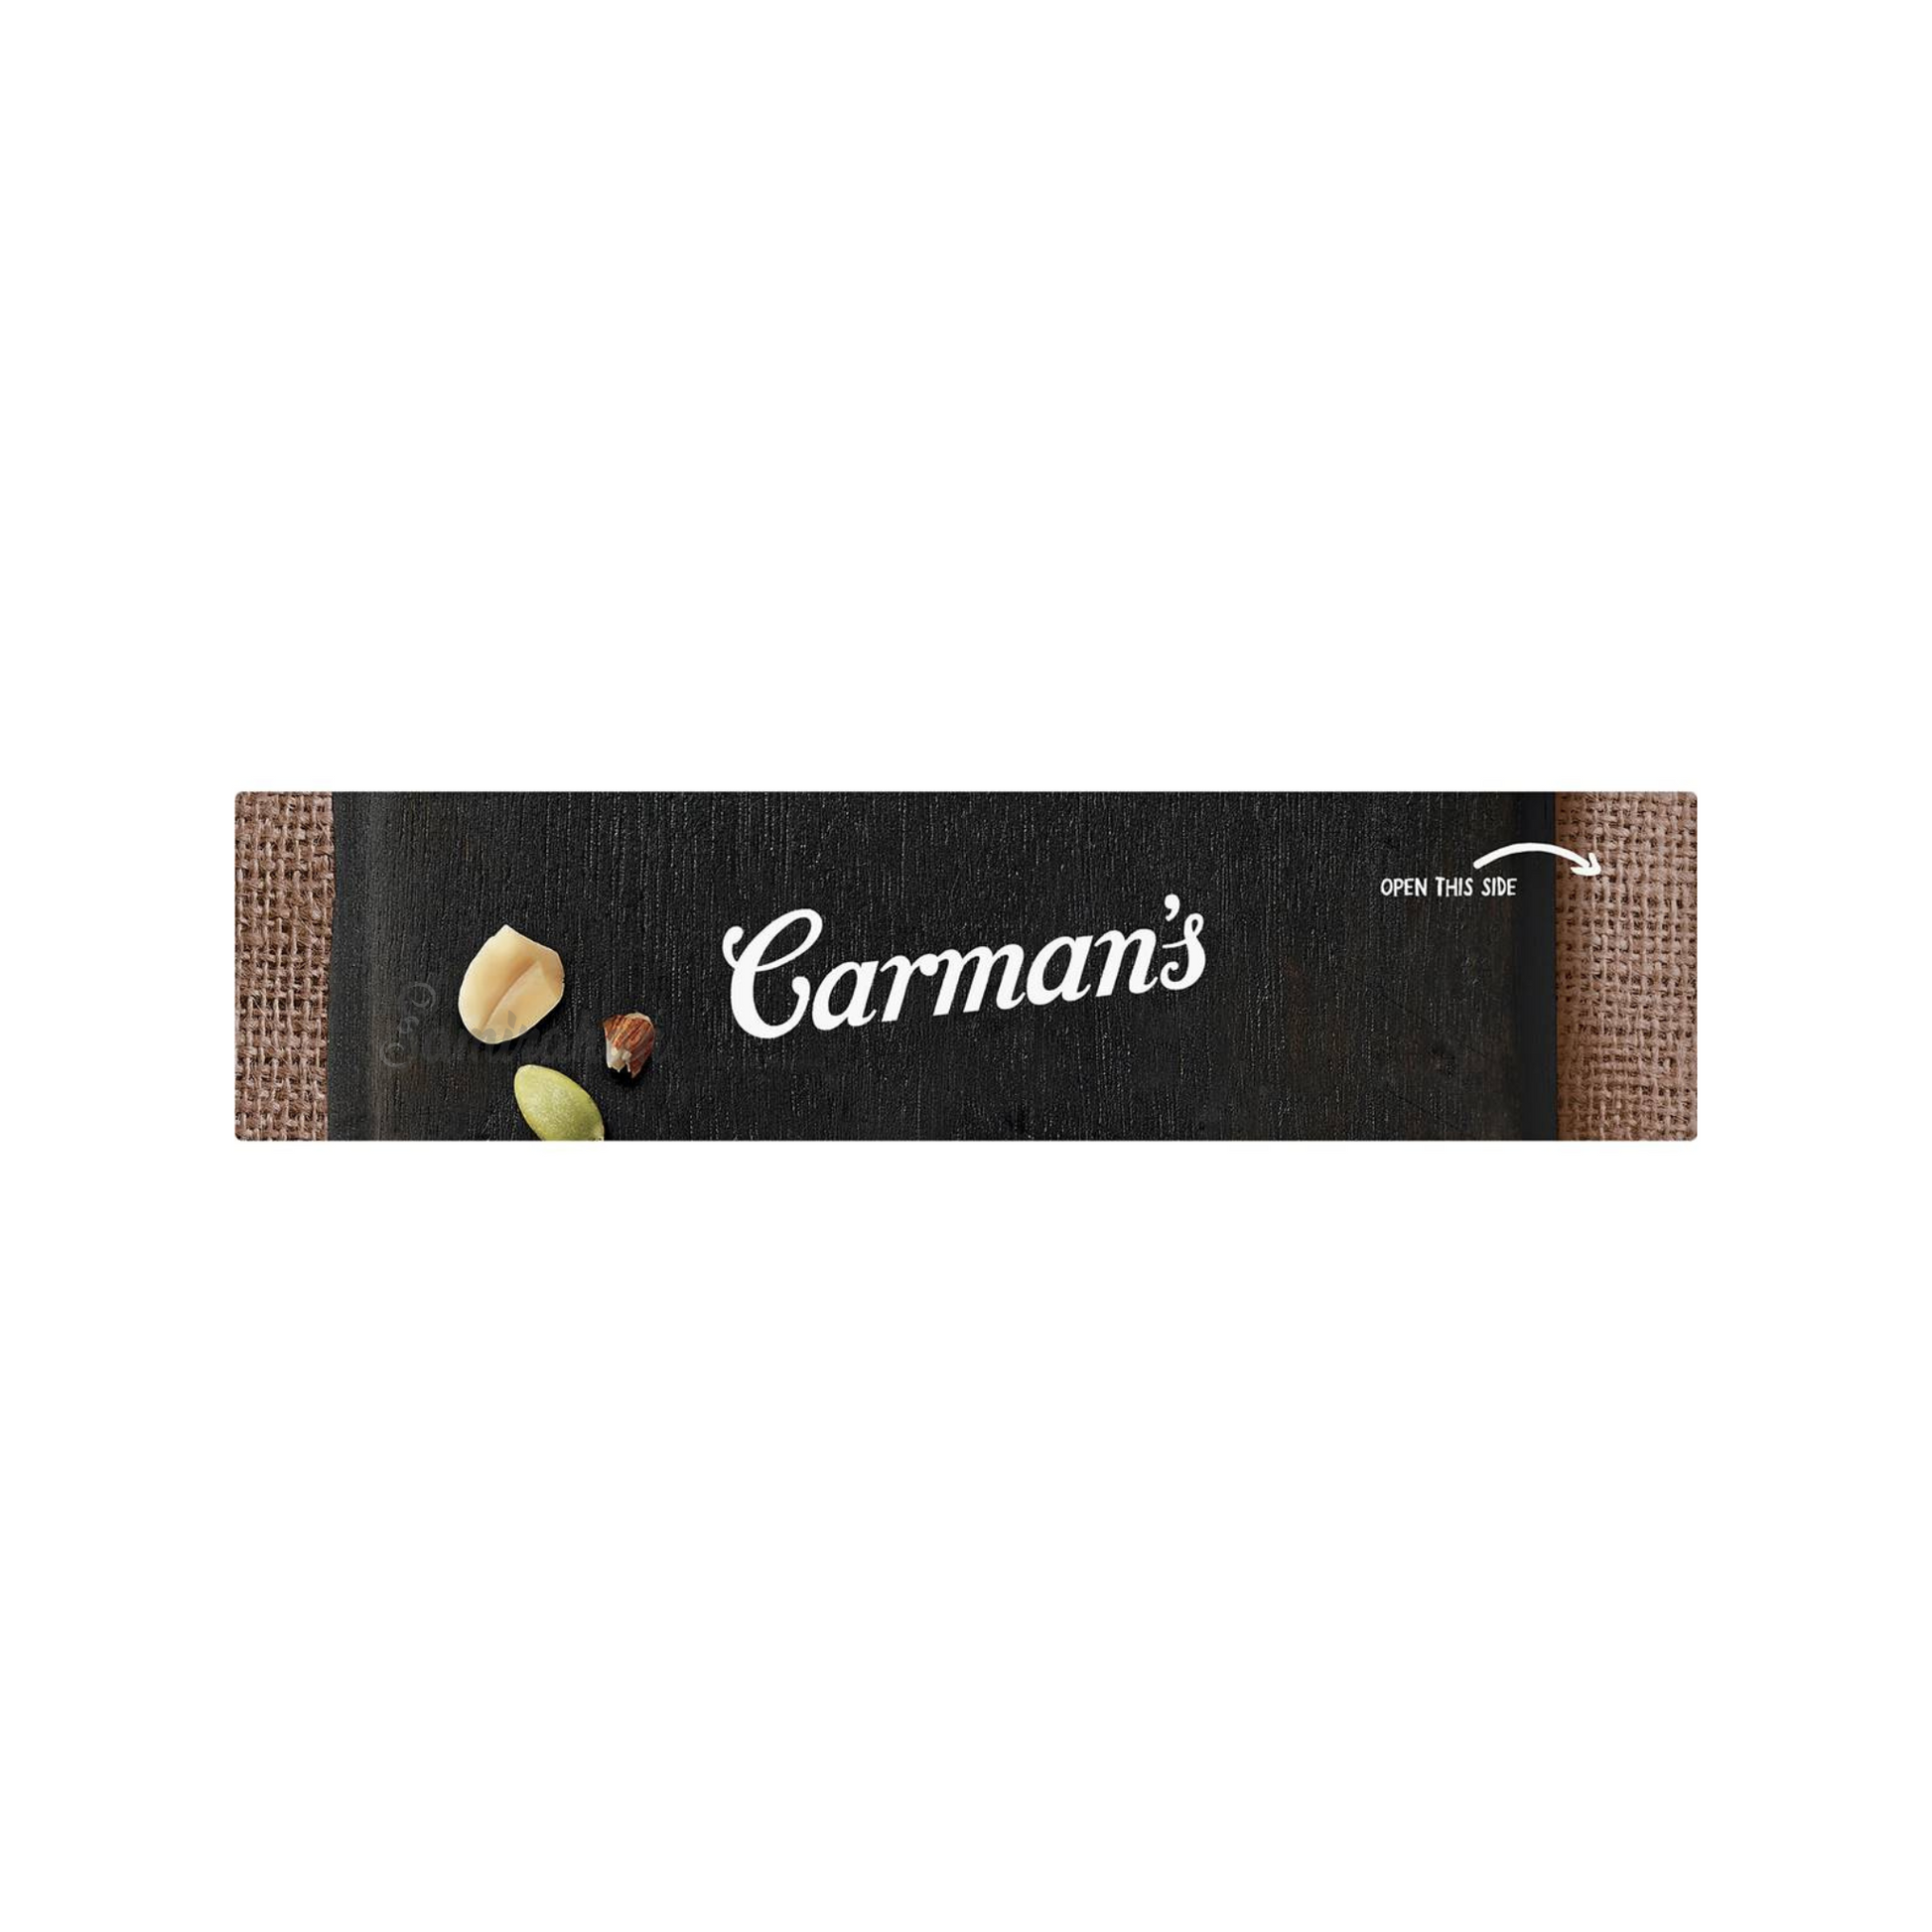 Carman's Almond Hazelnut Vanilla Nut Bars is a healthy snack that give you the best of nature – crunchy roasted peanuts, Australian almonds & buttery hazelnuts, a hint of cinnamon & golden honey. Halal certified. Fruit & gluten free. Best genuine foreign imported snack food healthy nutrition bar in Dhaka Bangladesh.